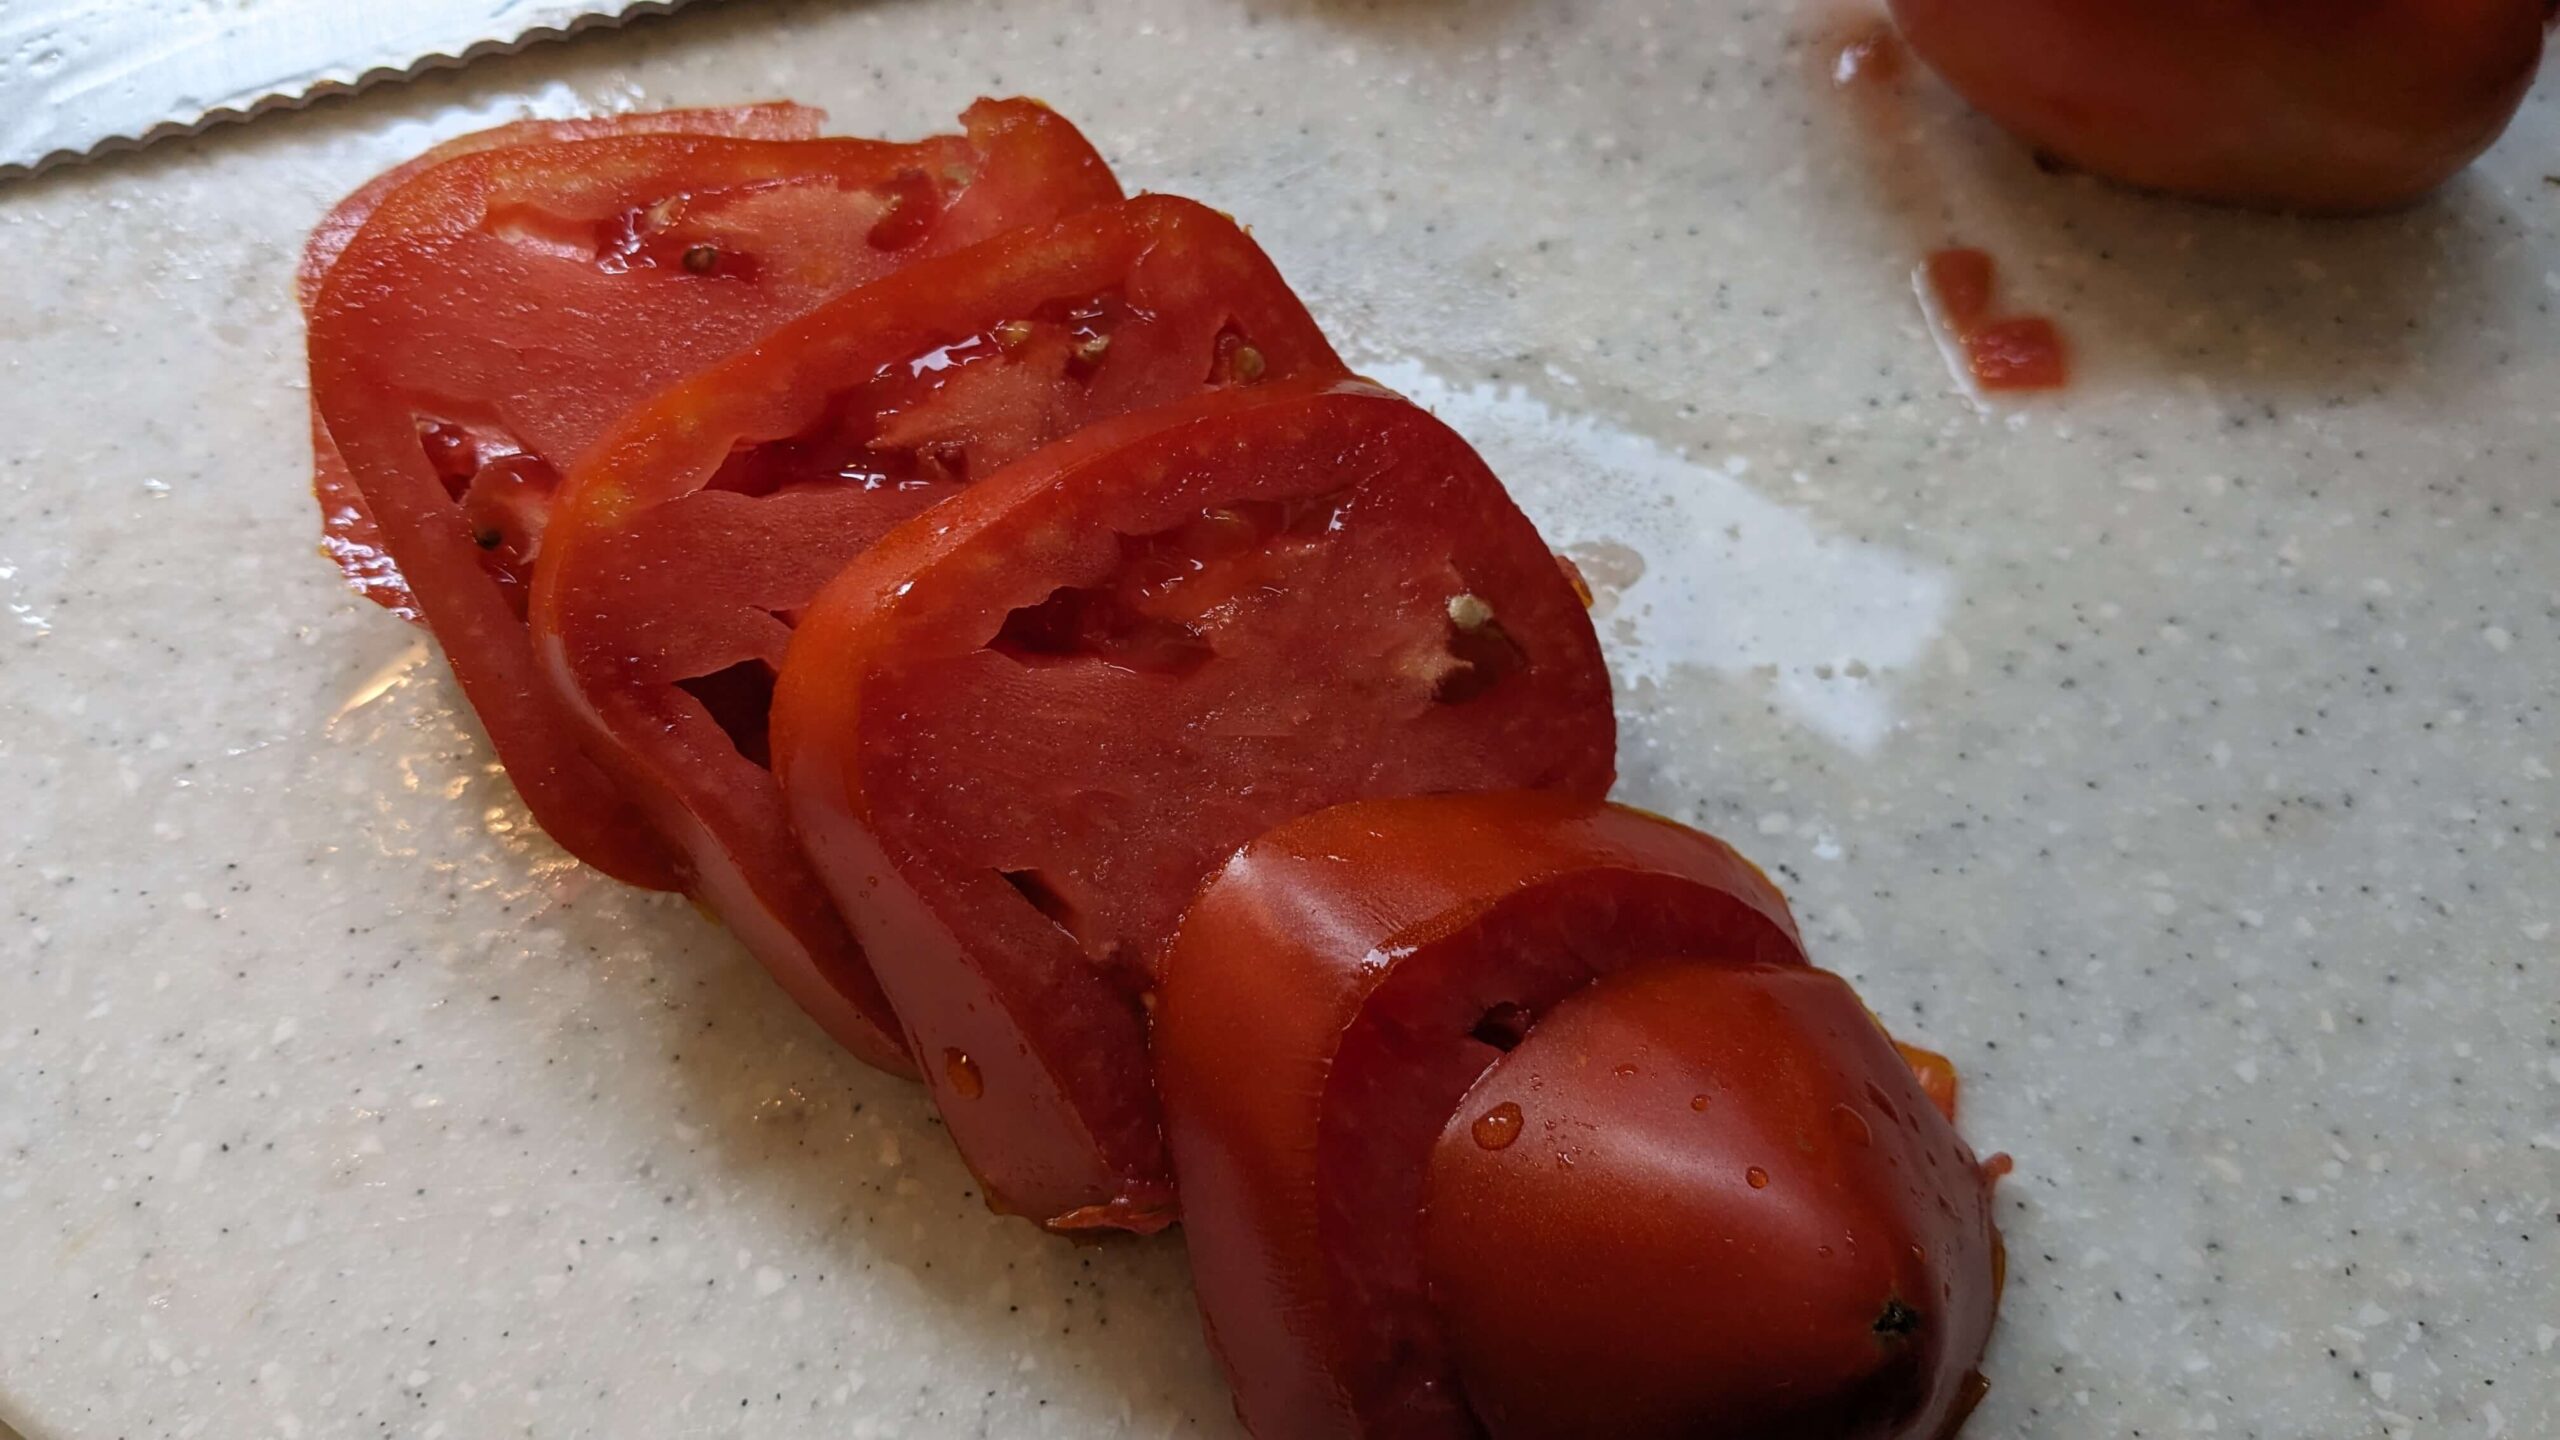 sliced amish paste tomato on a cutting board